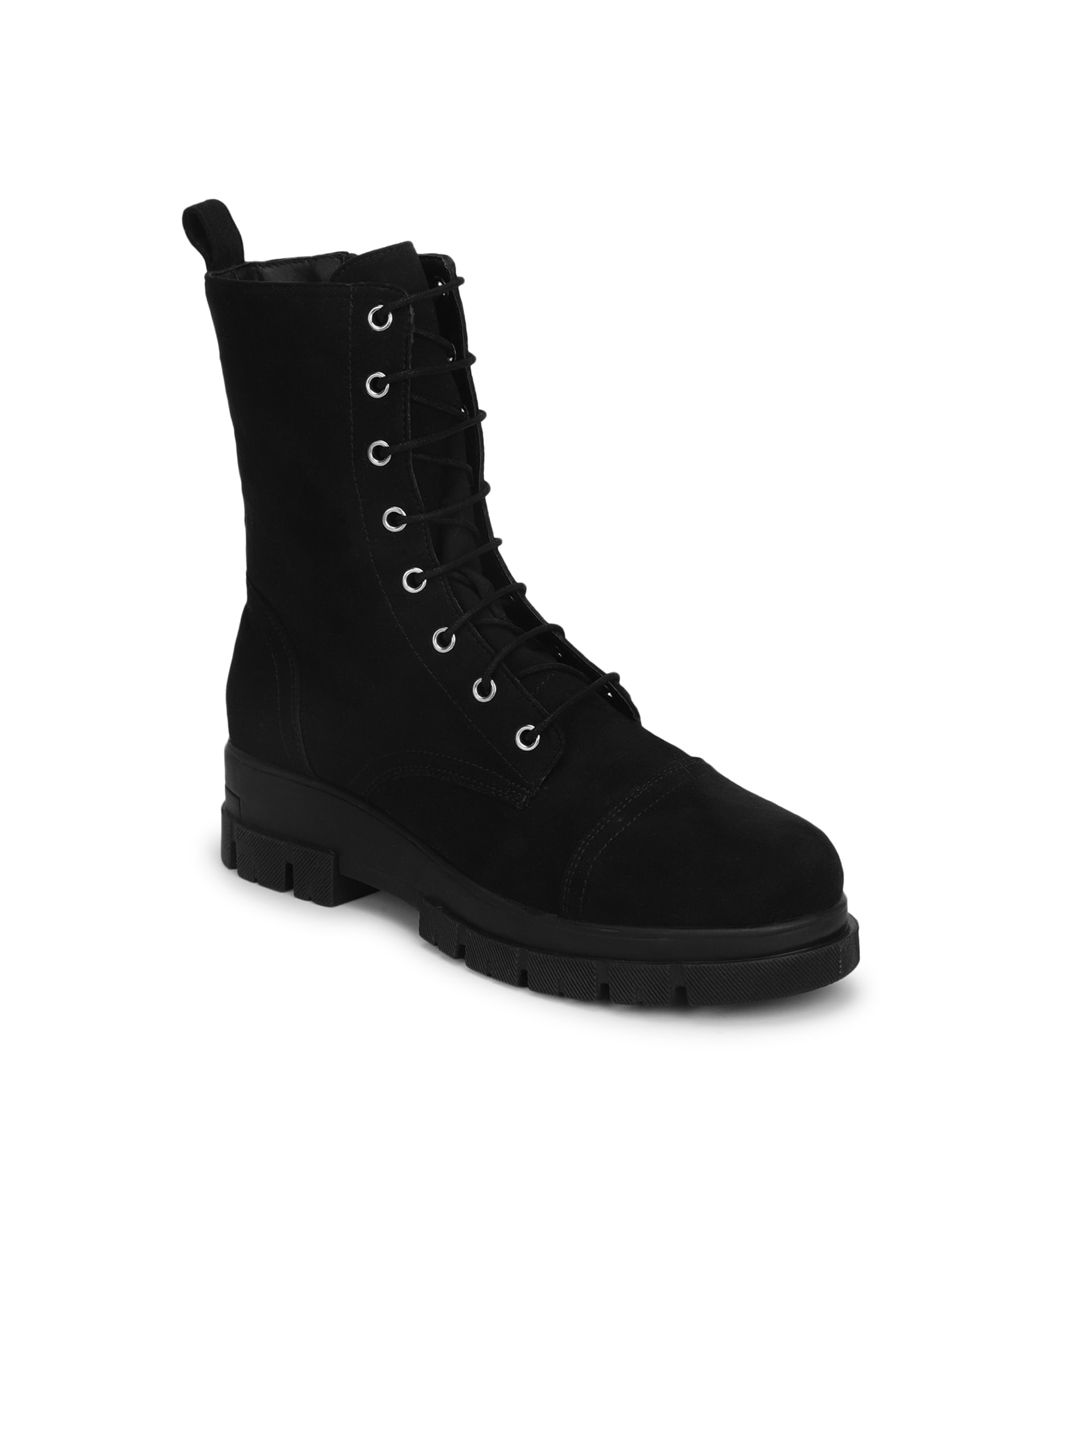 Truffle Collection Black Suede Block Heeled Boots Price in India